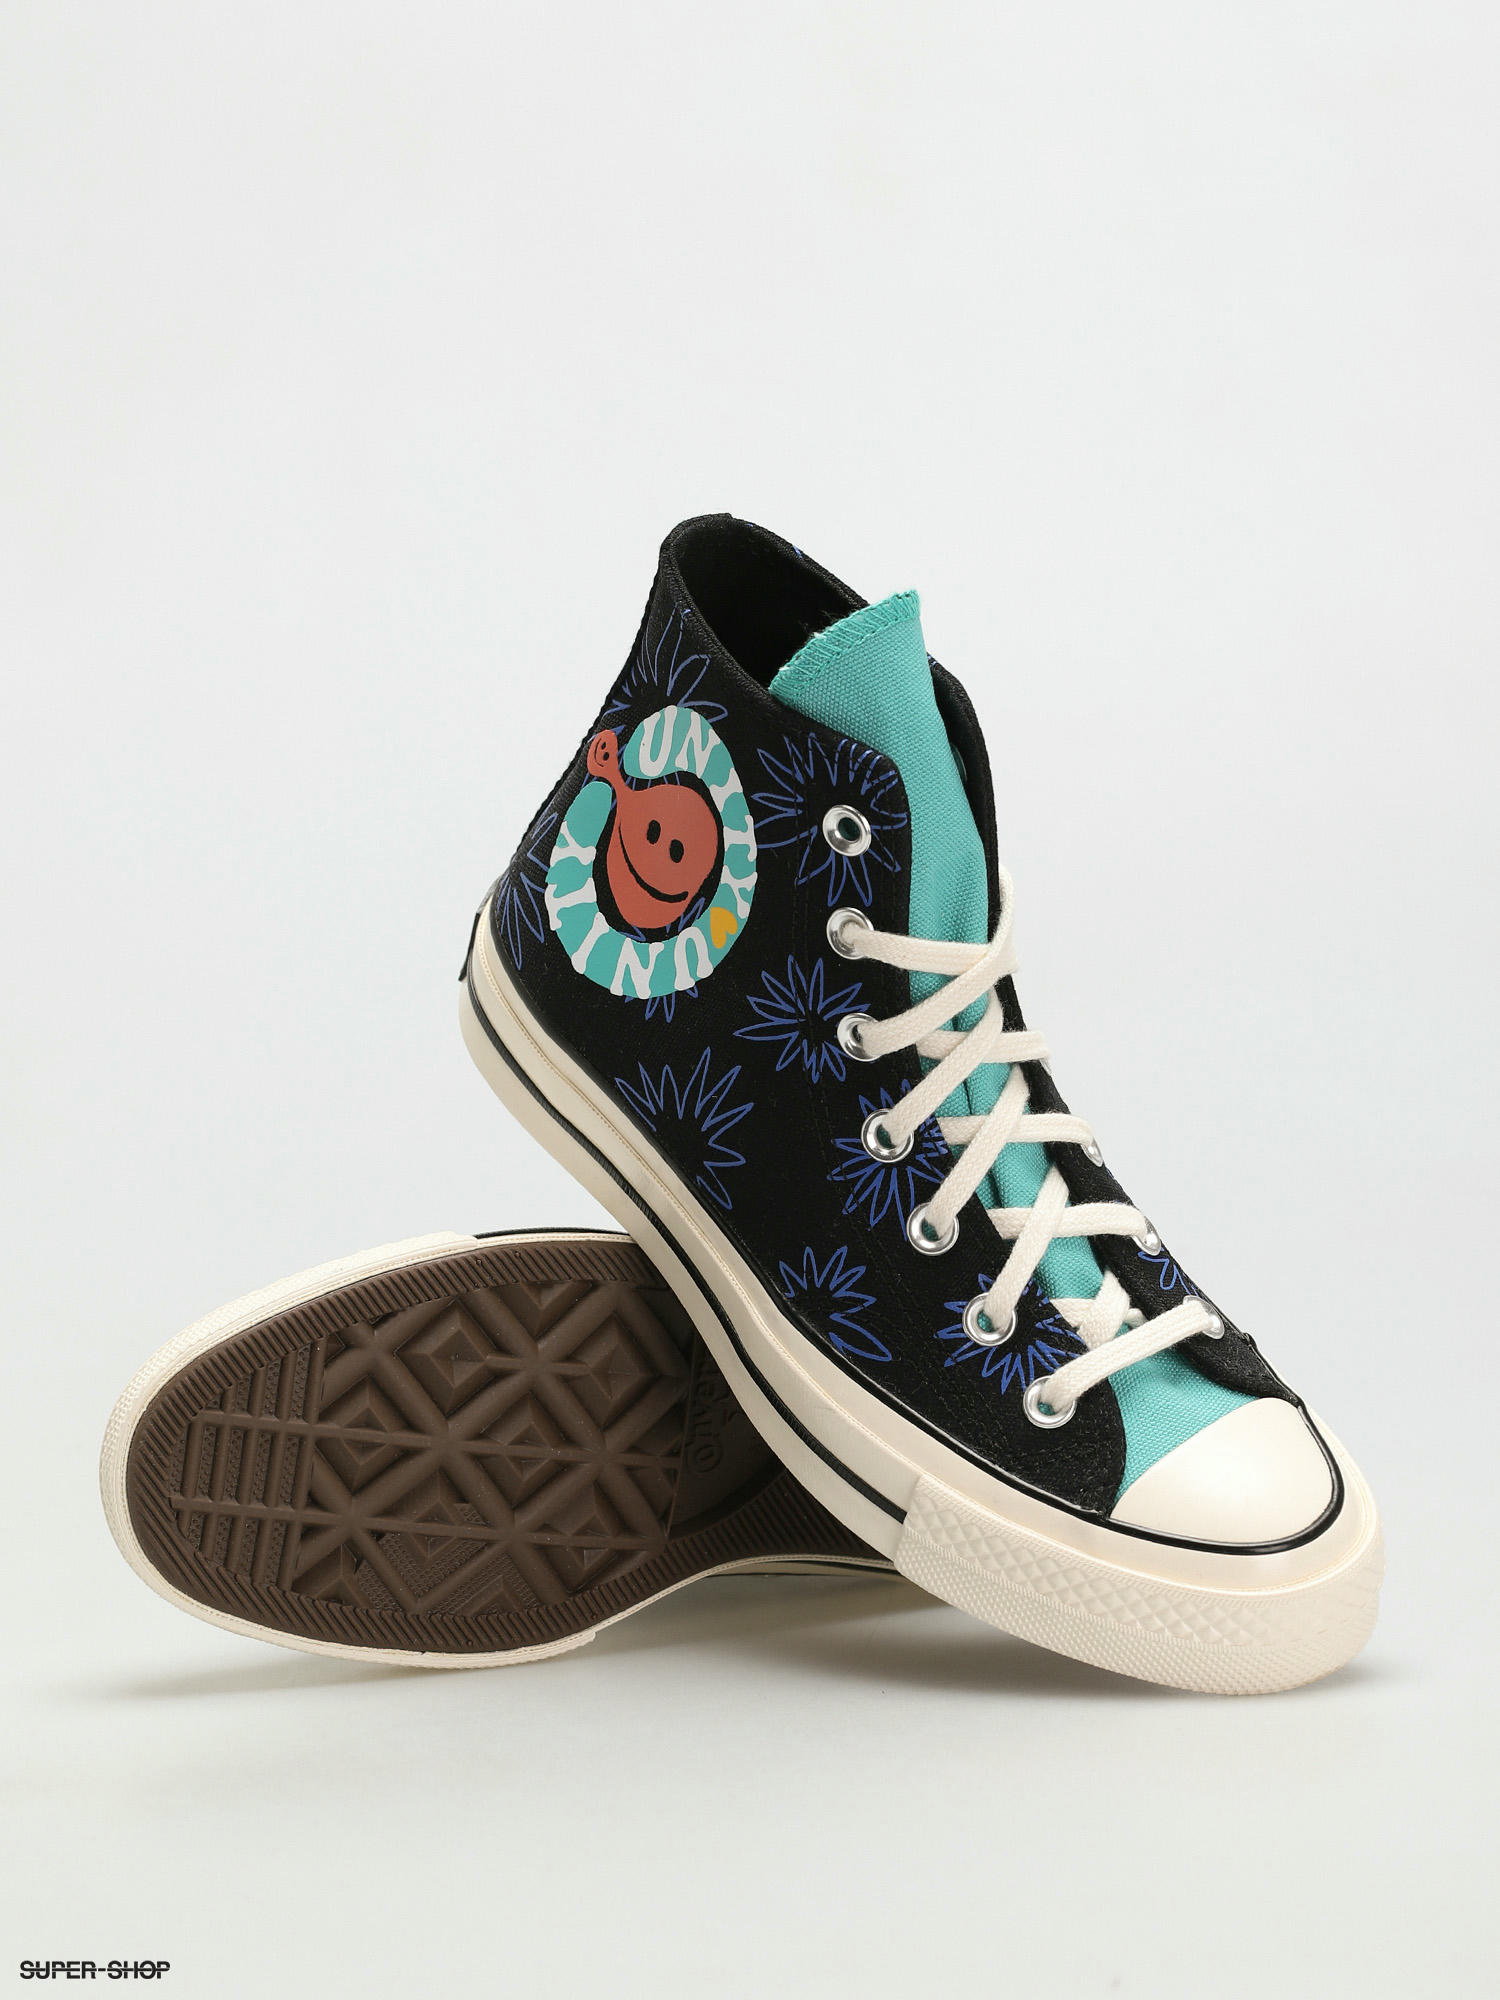 teal and black converse